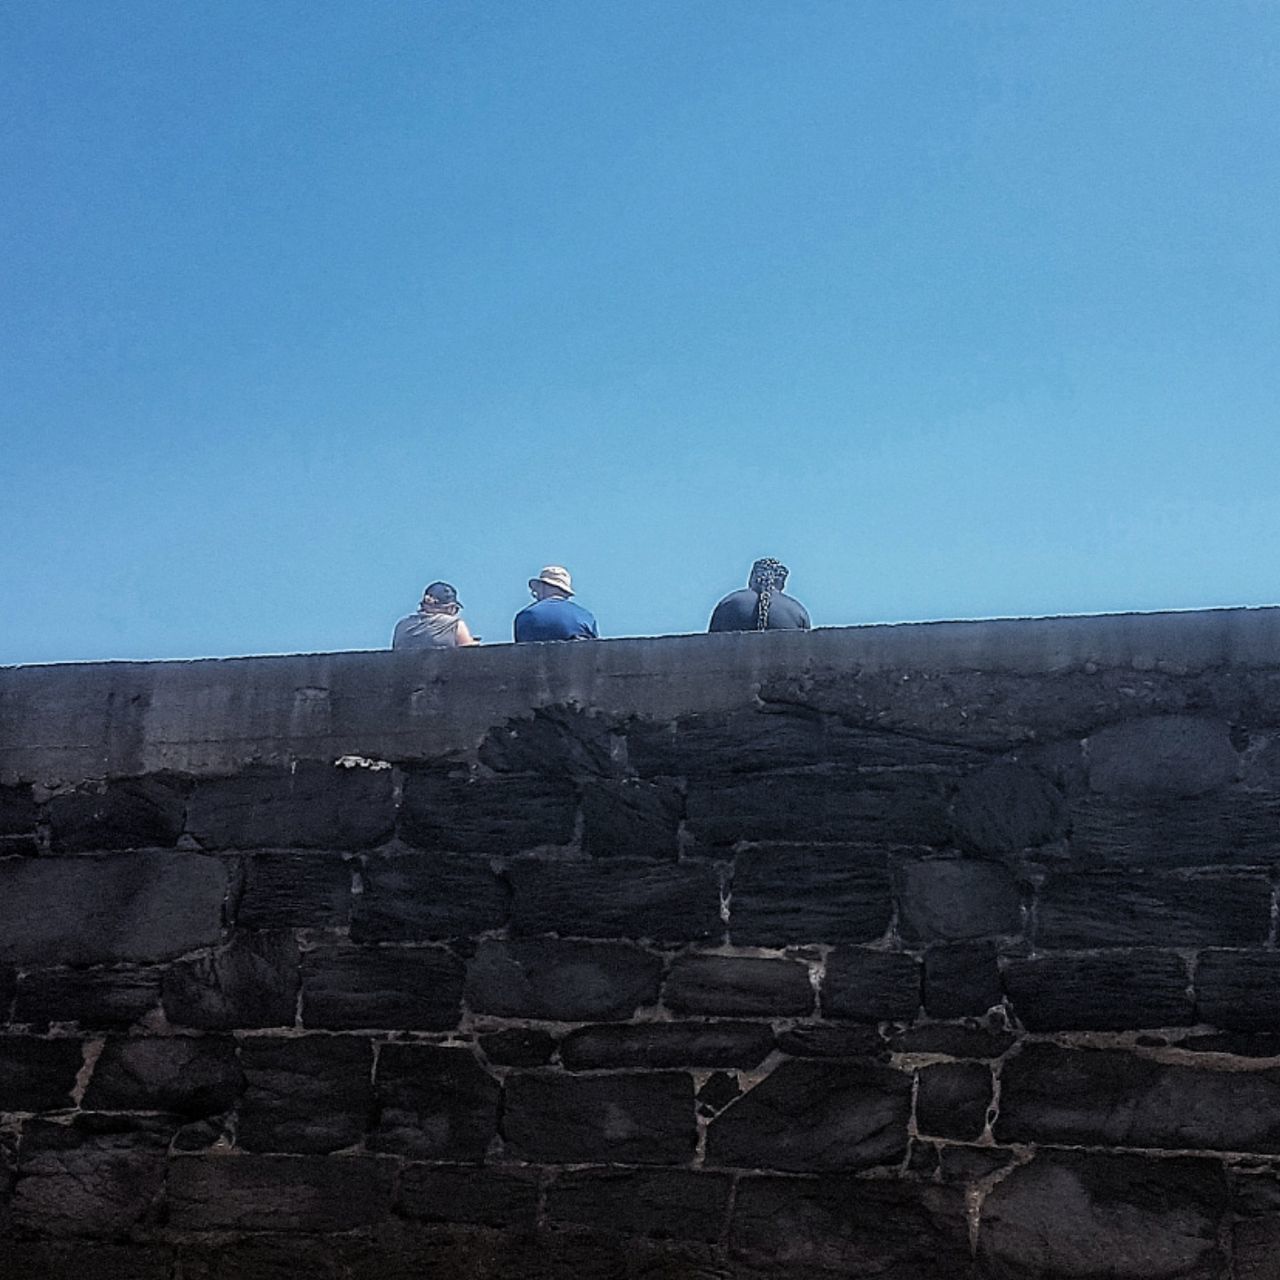 LOW ANGLE VIEW OF PEOPLE STANDING ON COBBLESTONE AGAINST CLEAR SKY